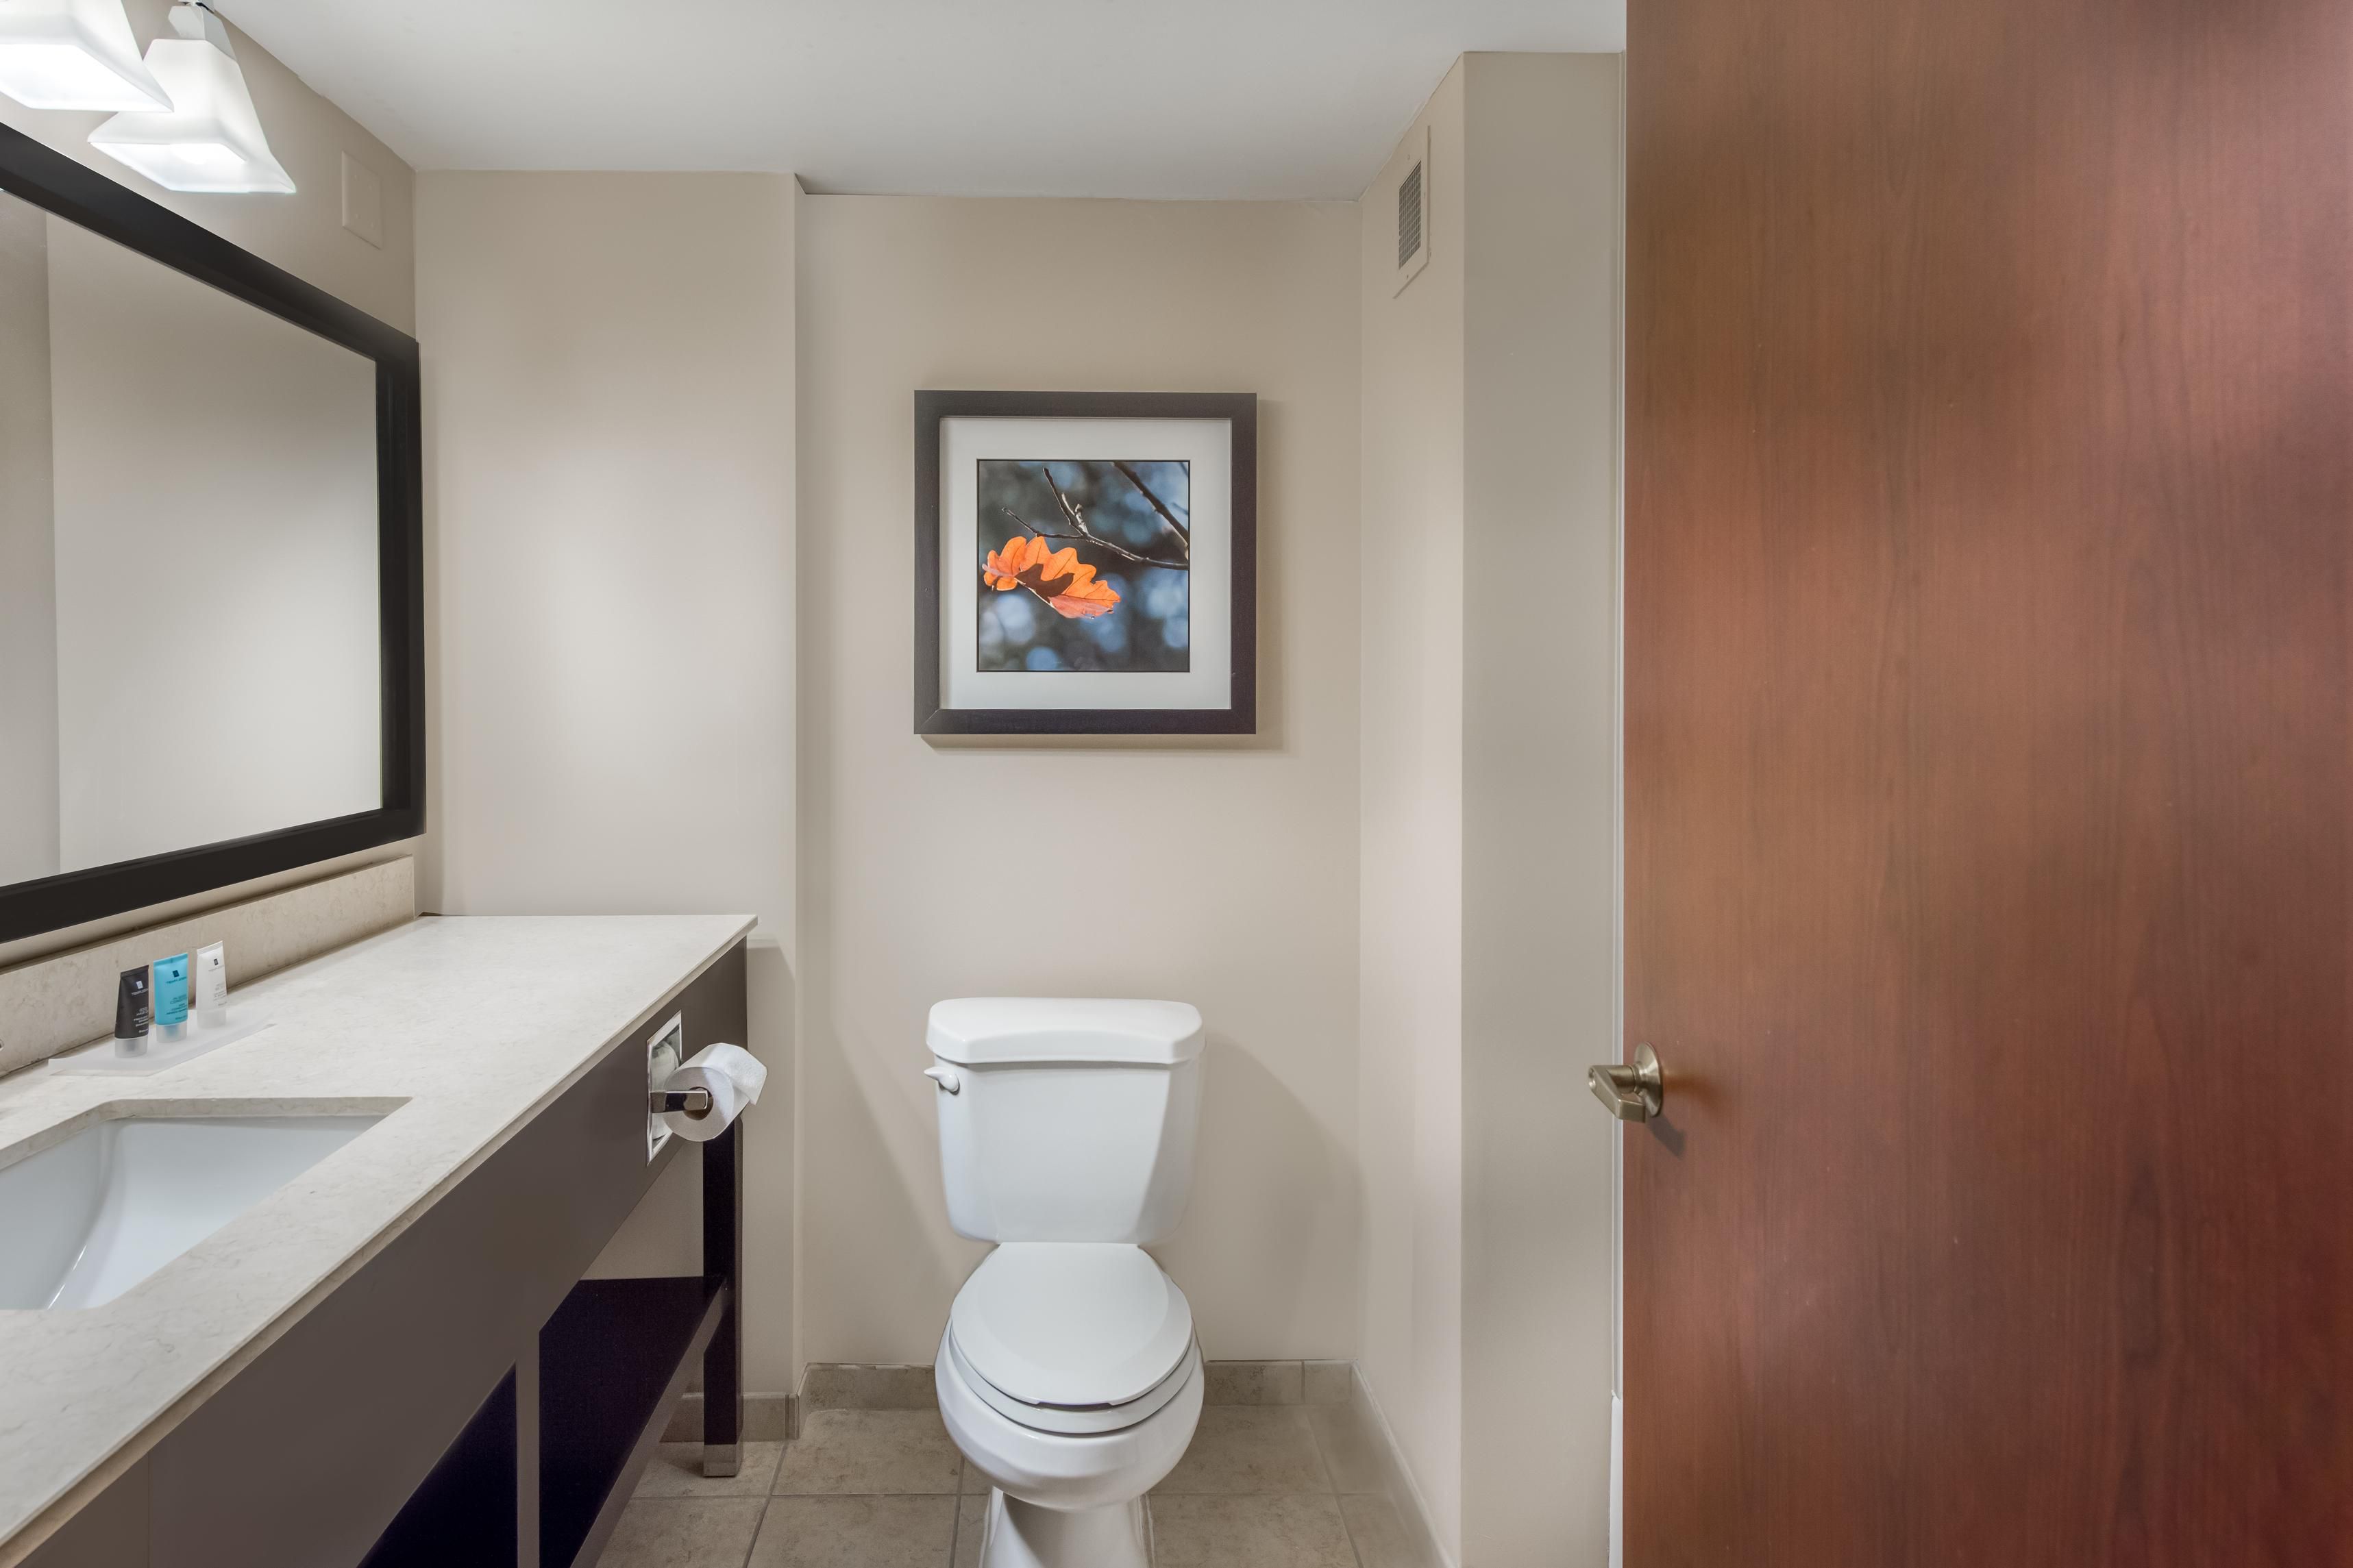 Spacious bathroom with updated amenities